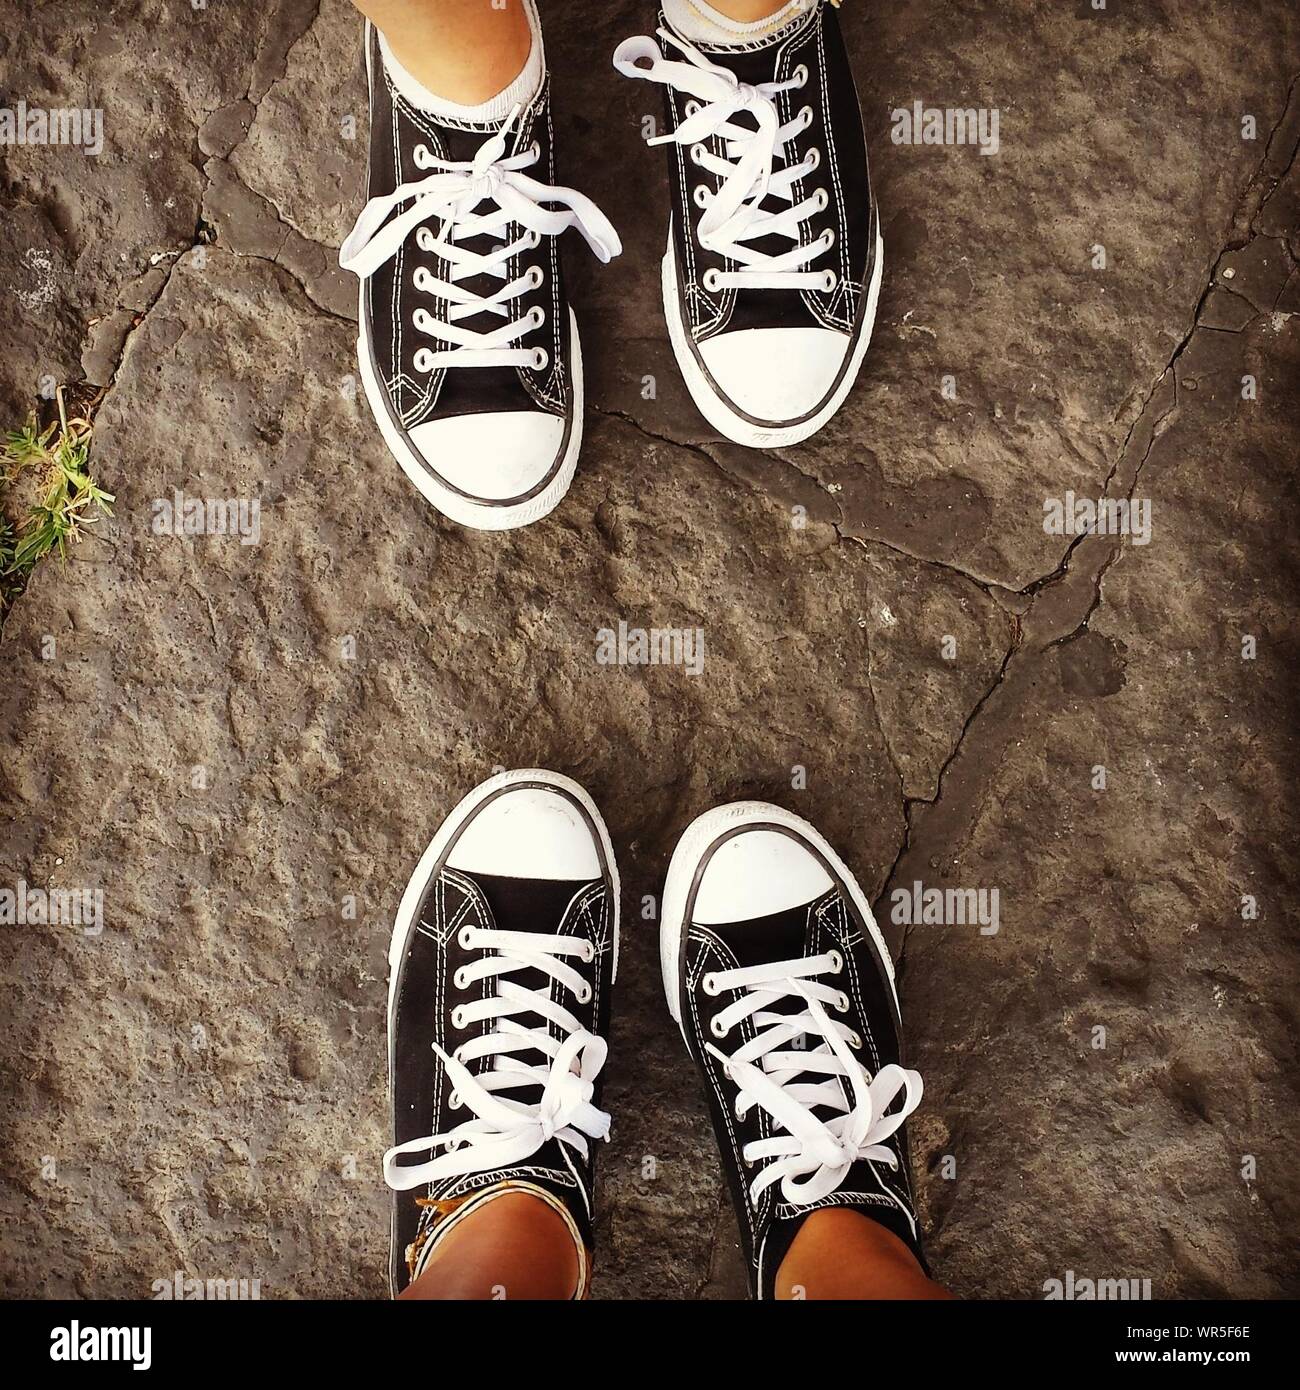 Low Section Of People Wearing Identical Shoes Stock Photo